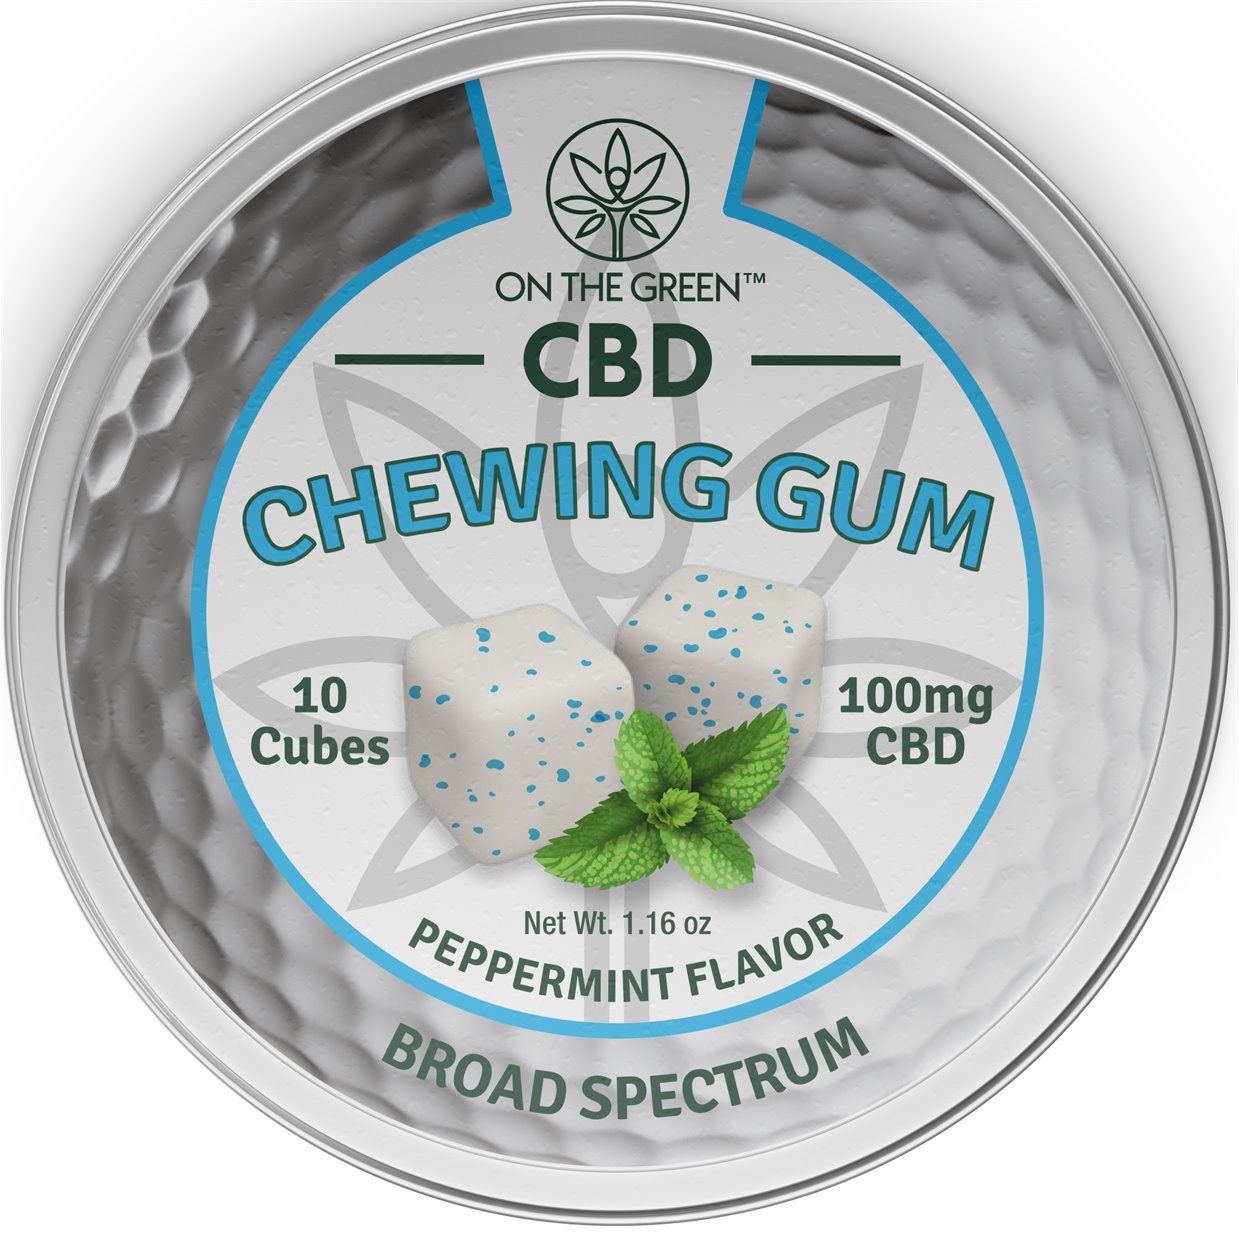 on-the-green-chewing-gum-10-pack-10-mg-p